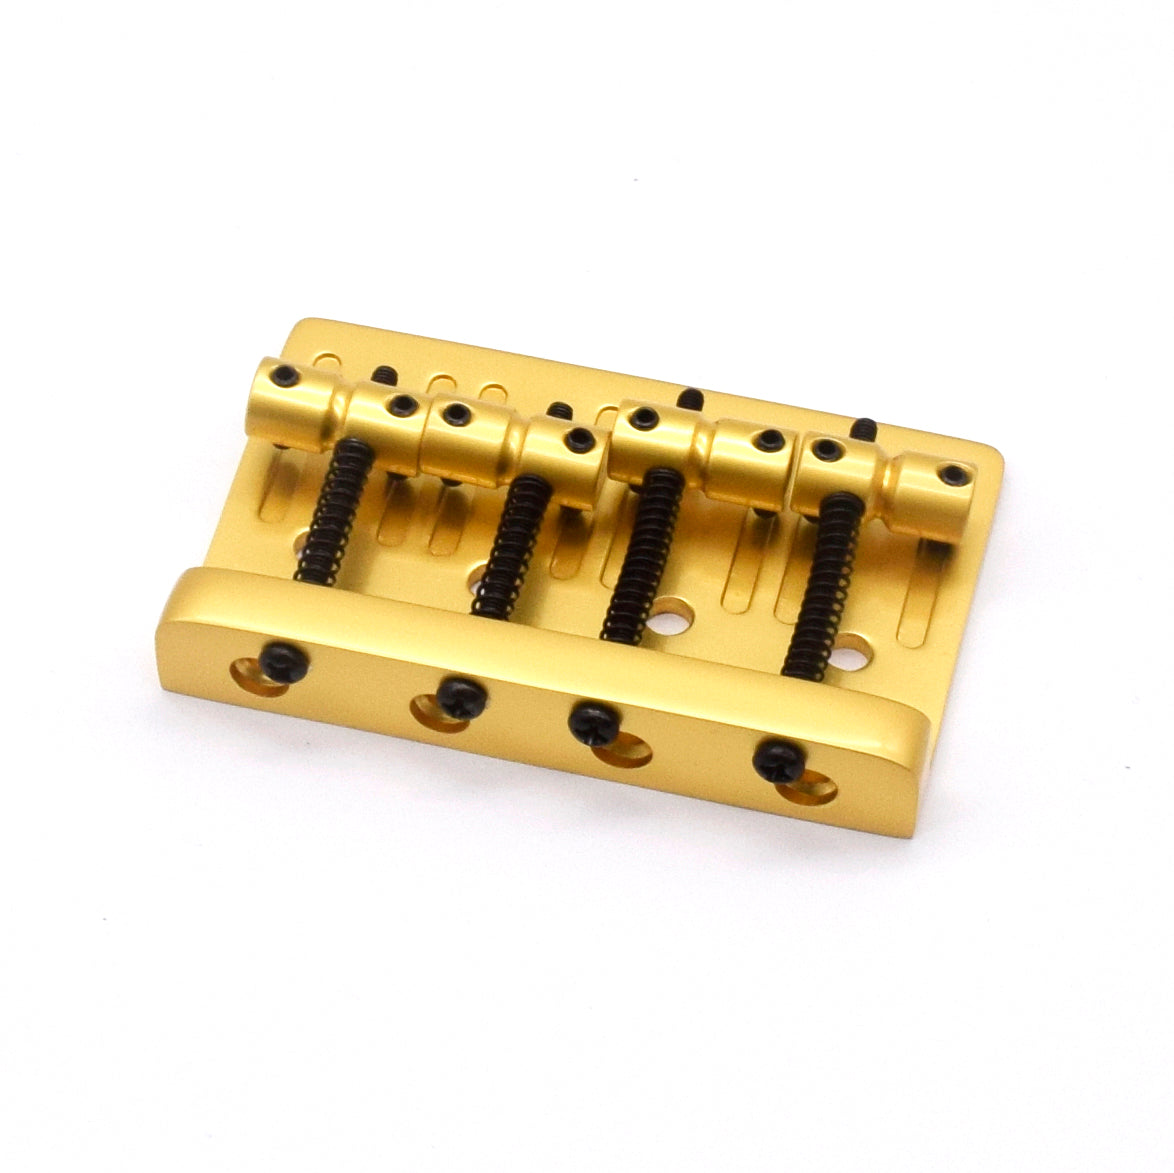 KD By AxLabs Vintage-Style Bass Bridge - 5-Screw, 4-String, String-Through-Top Or Bottom, Brass Saddles - AxLabs